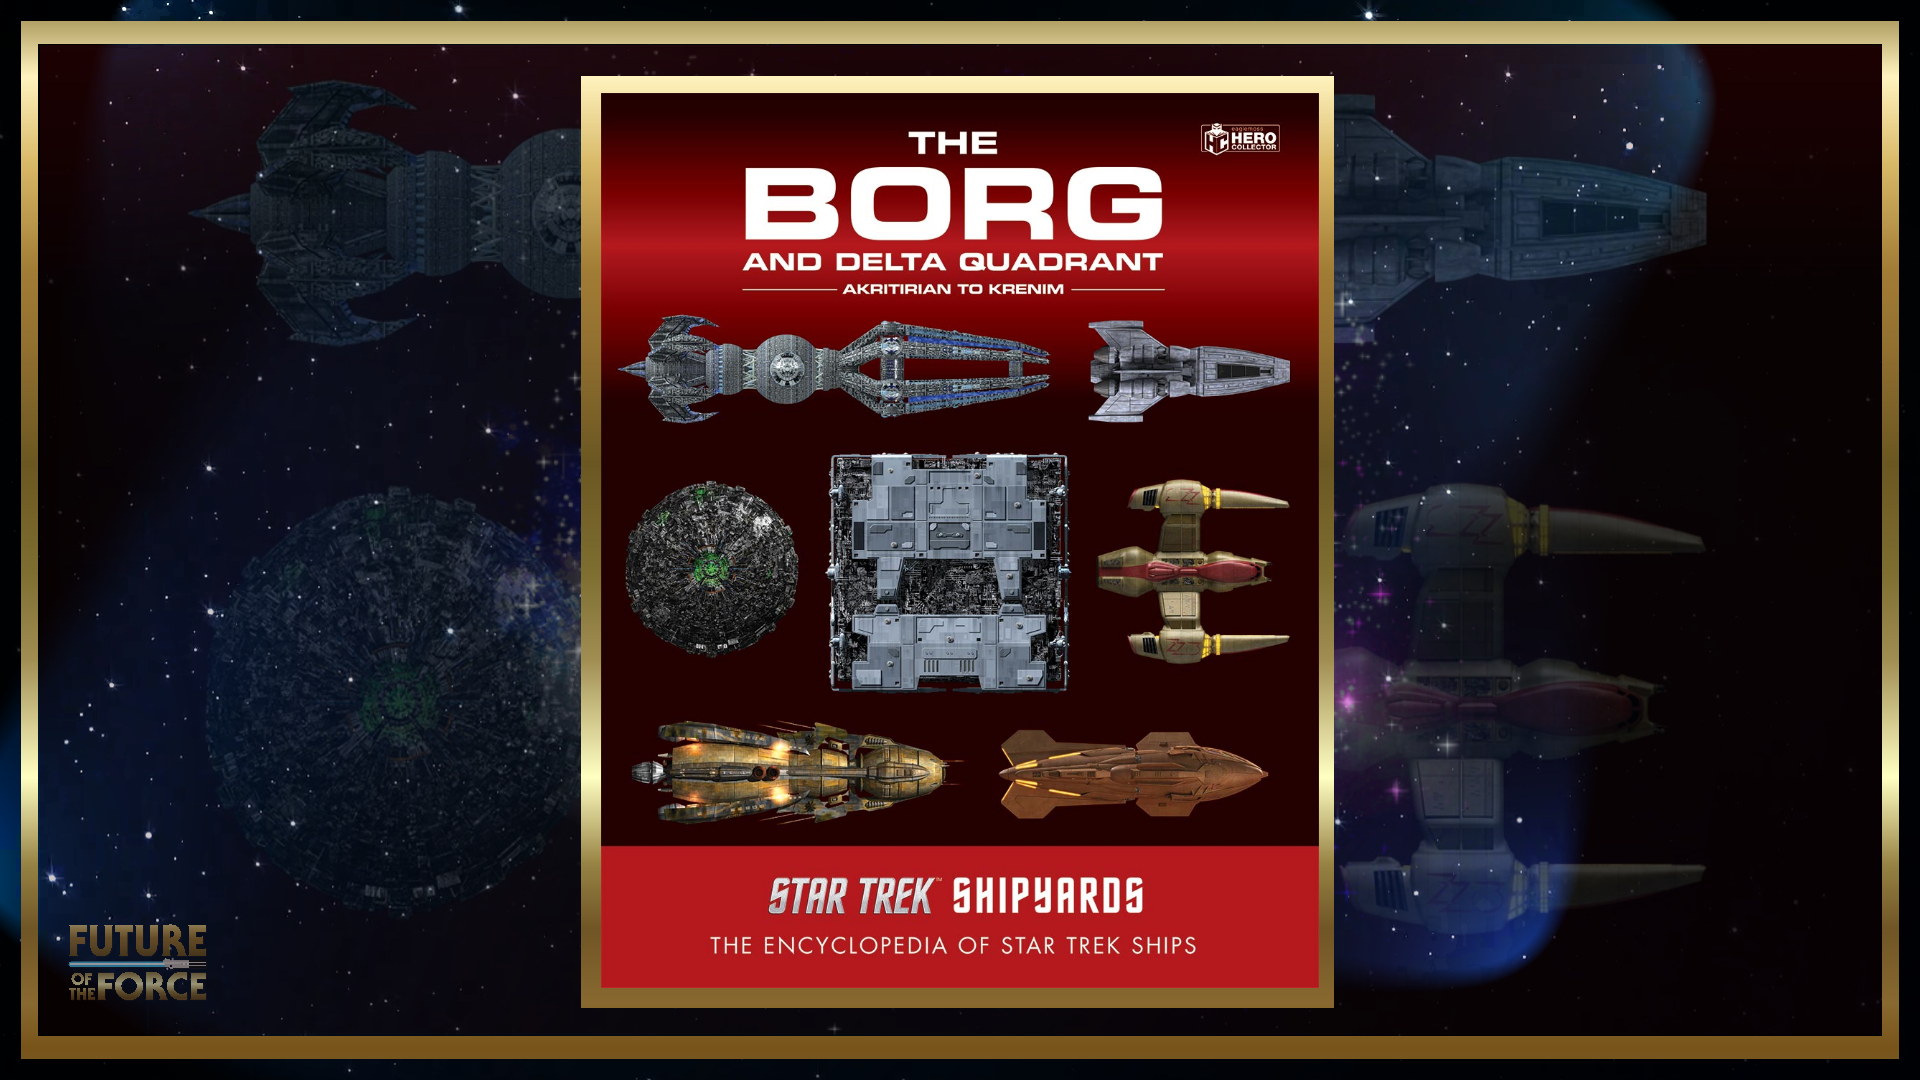 Star Trek Shipyards | ‘The Borg And The Delta Quadrant’ (Preview) – Future of the Force